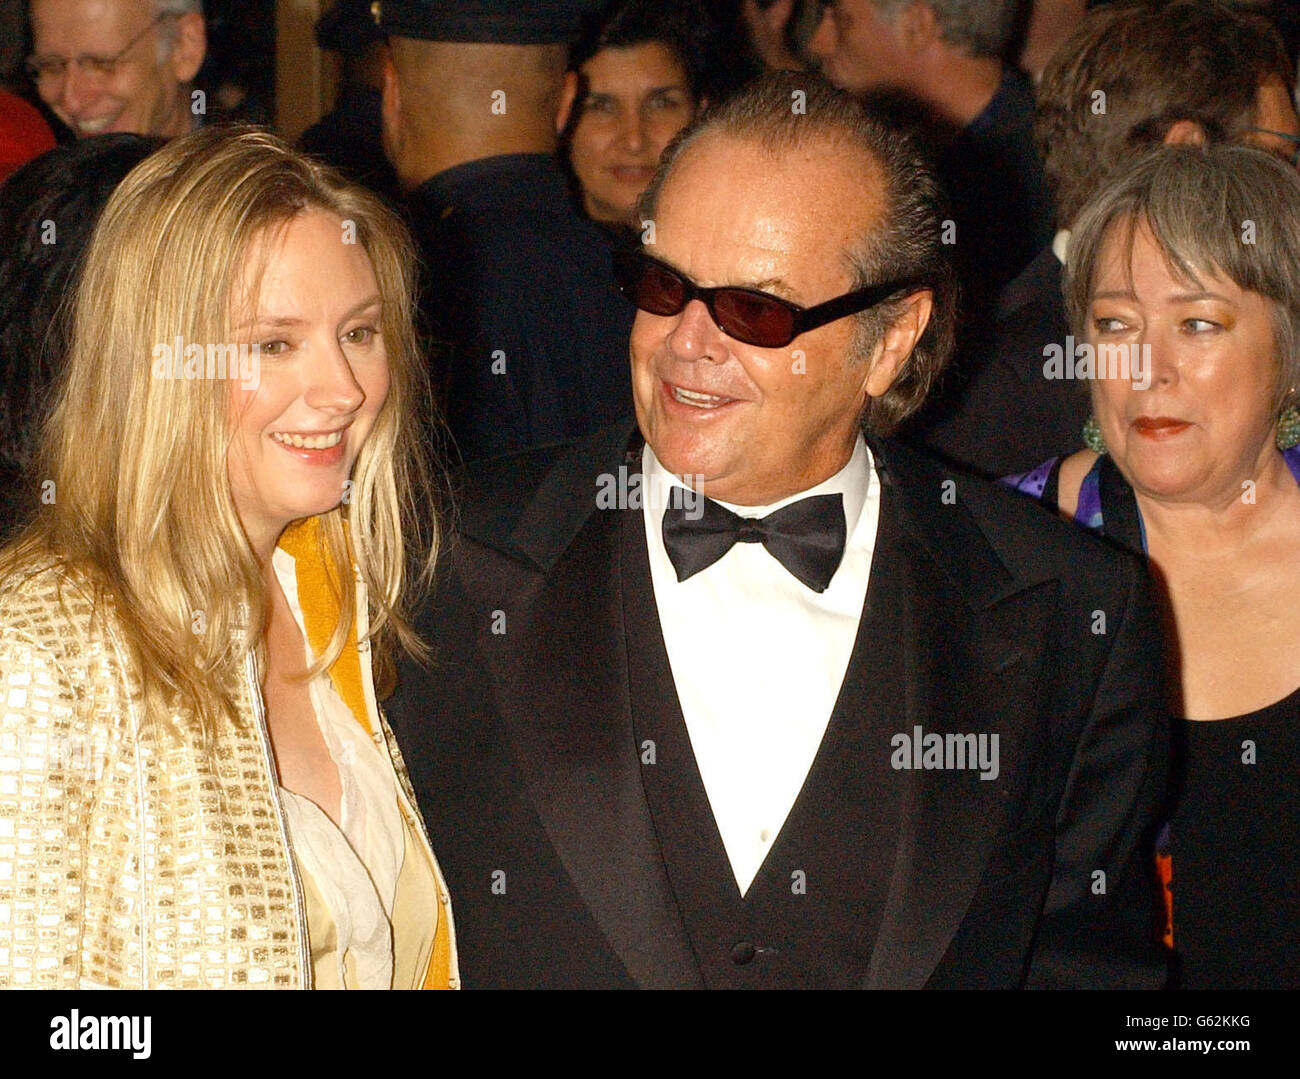 Actors, from left to right; Hope Davis, Jack Nicholson and Kathy Bates arrive for the film premiere of 'About Schmidt' during the opening of the 40th New York Film Festival at the Lincoln Center in New York. Stock Photo